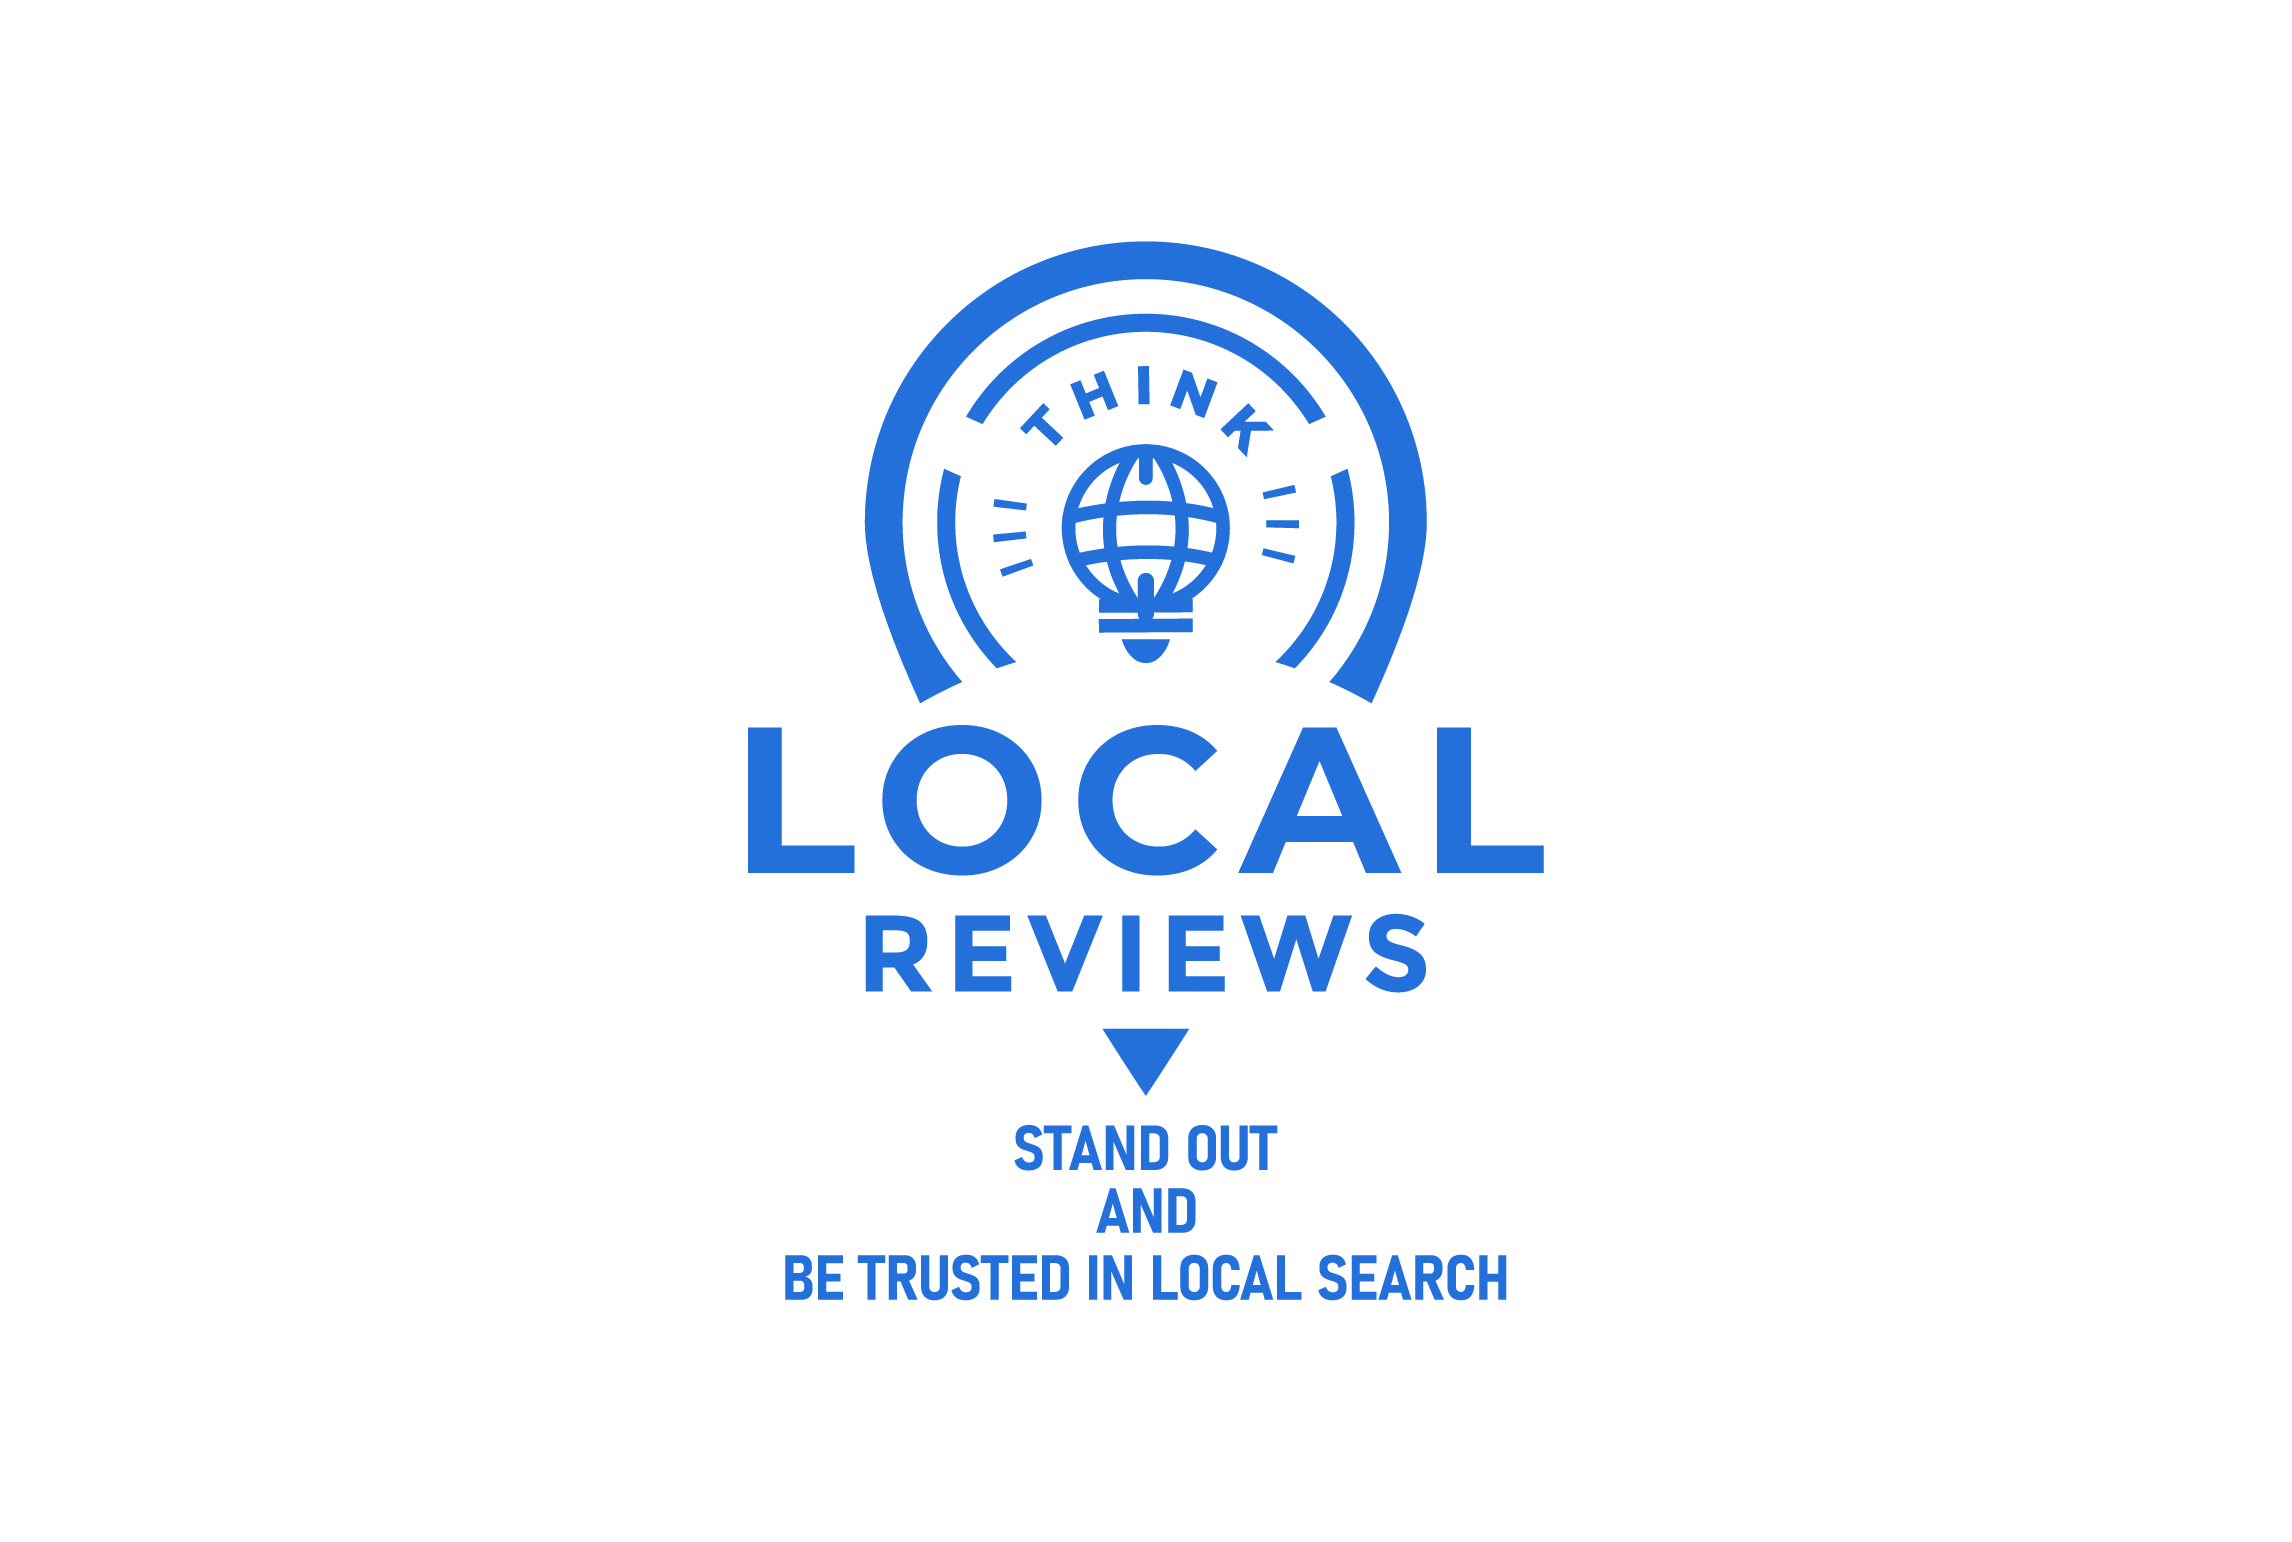 The logo for local reviews stand out and trust local search while utilizing a reputation management tool.